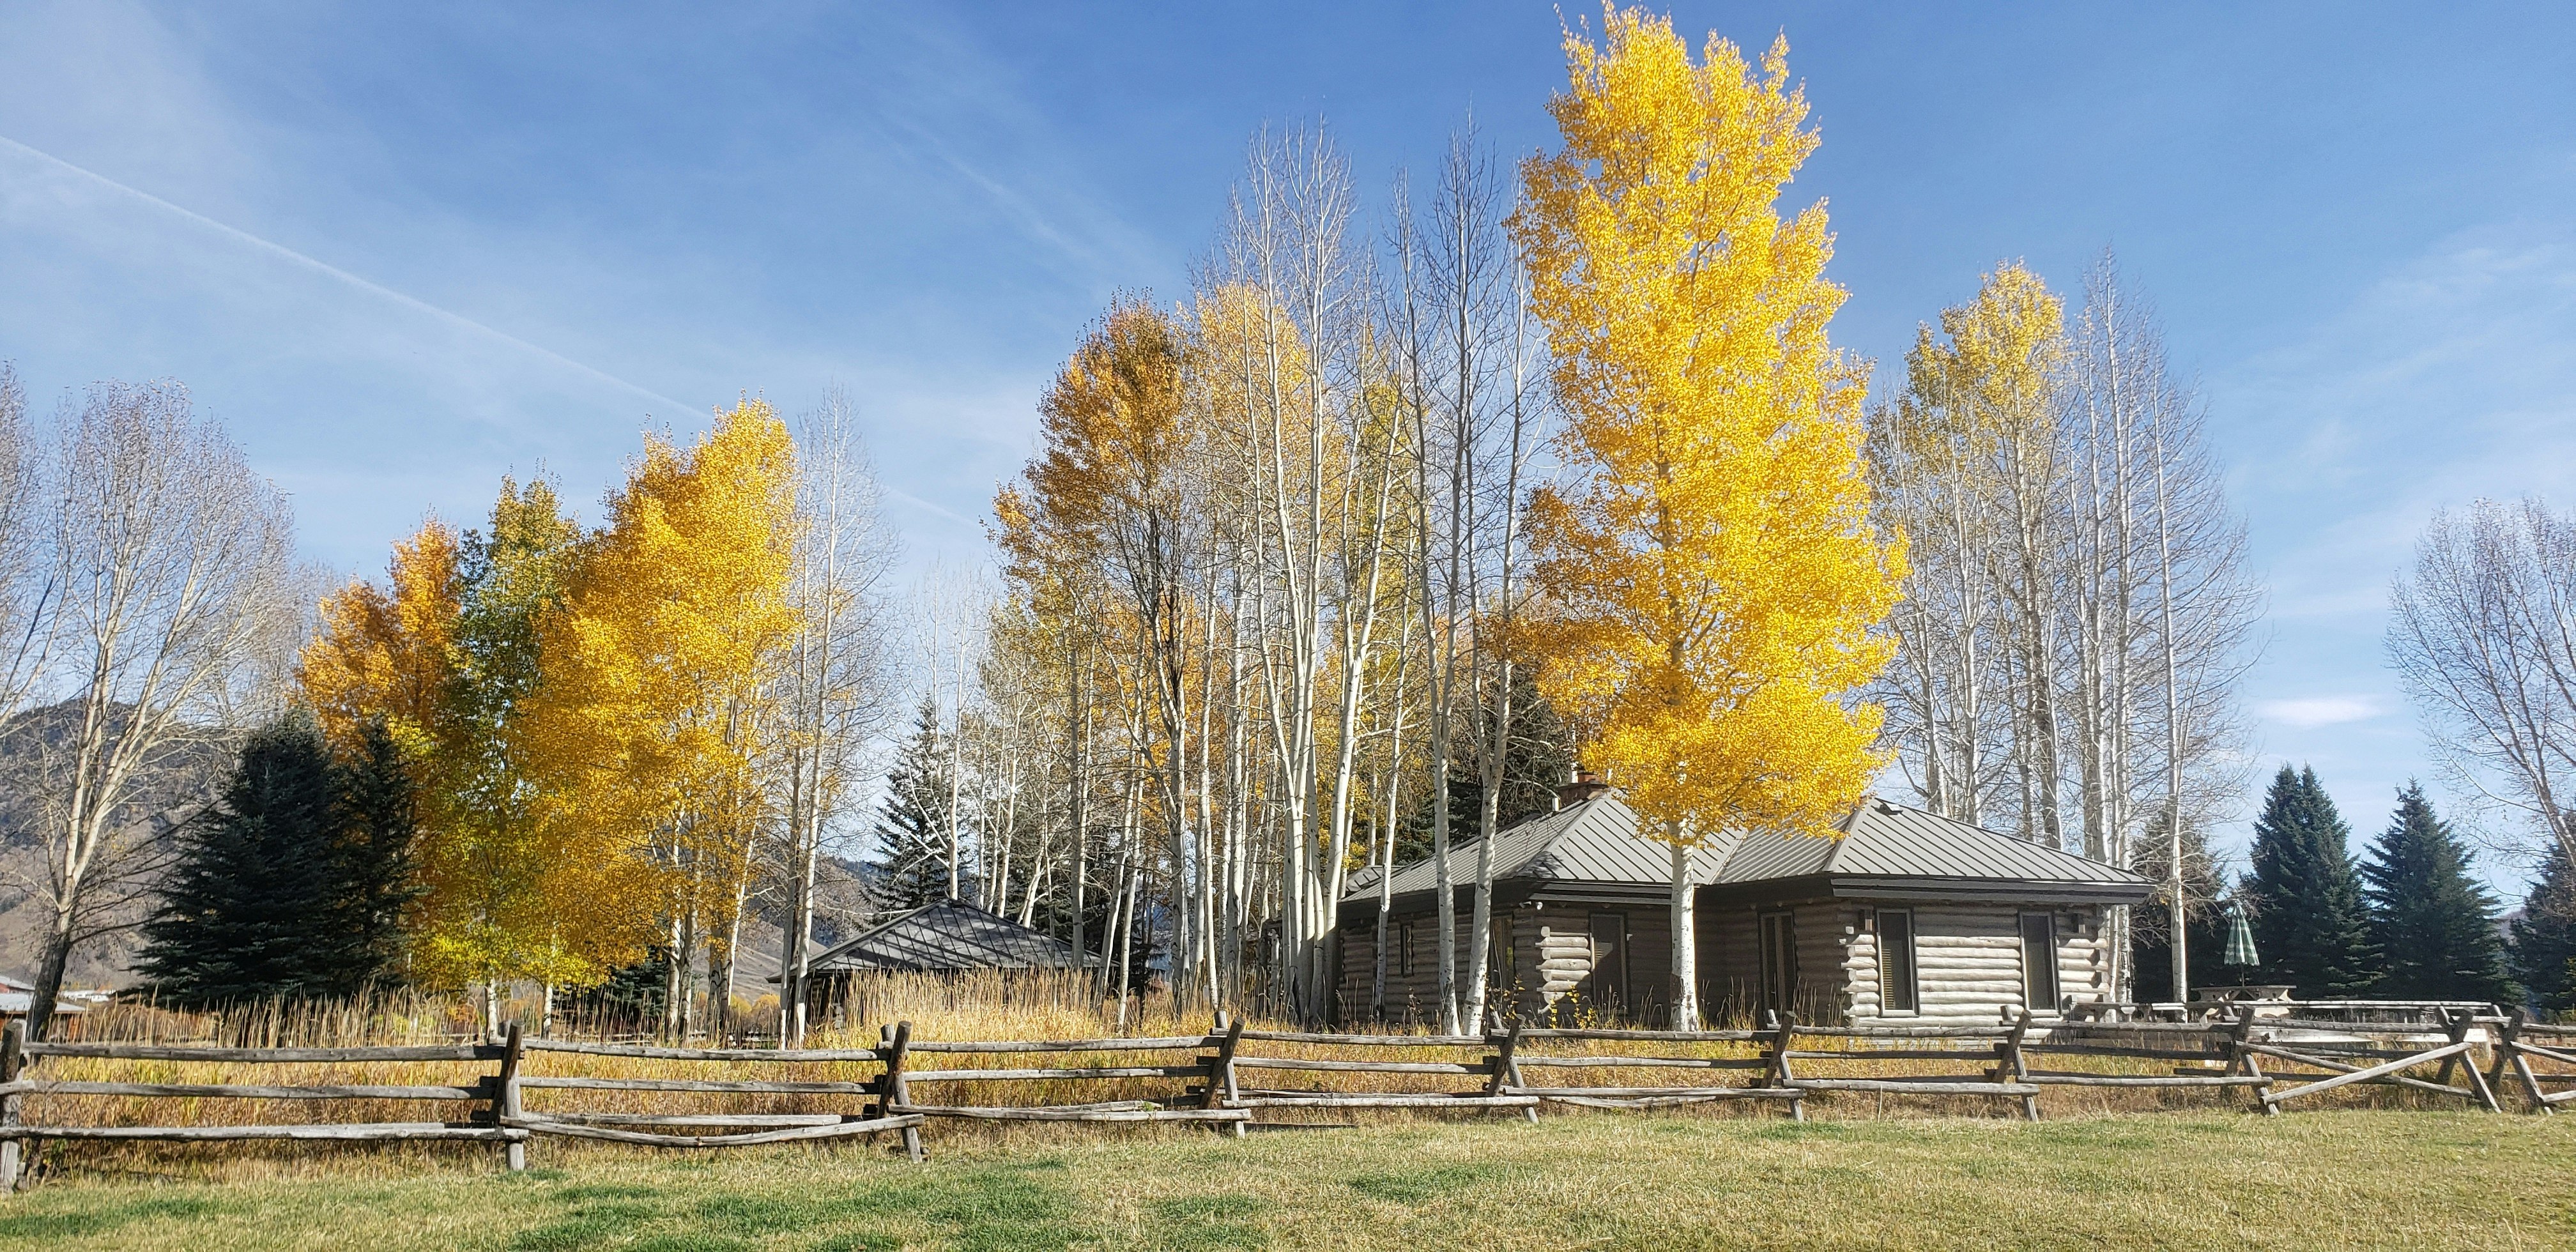 Jackson Ranch Aspens frame the scene in gold at the Western Star Ranch which includes an 8 acre pasture and a run in barn as well as a cabin three car heated garage and a dog run 10 21 23